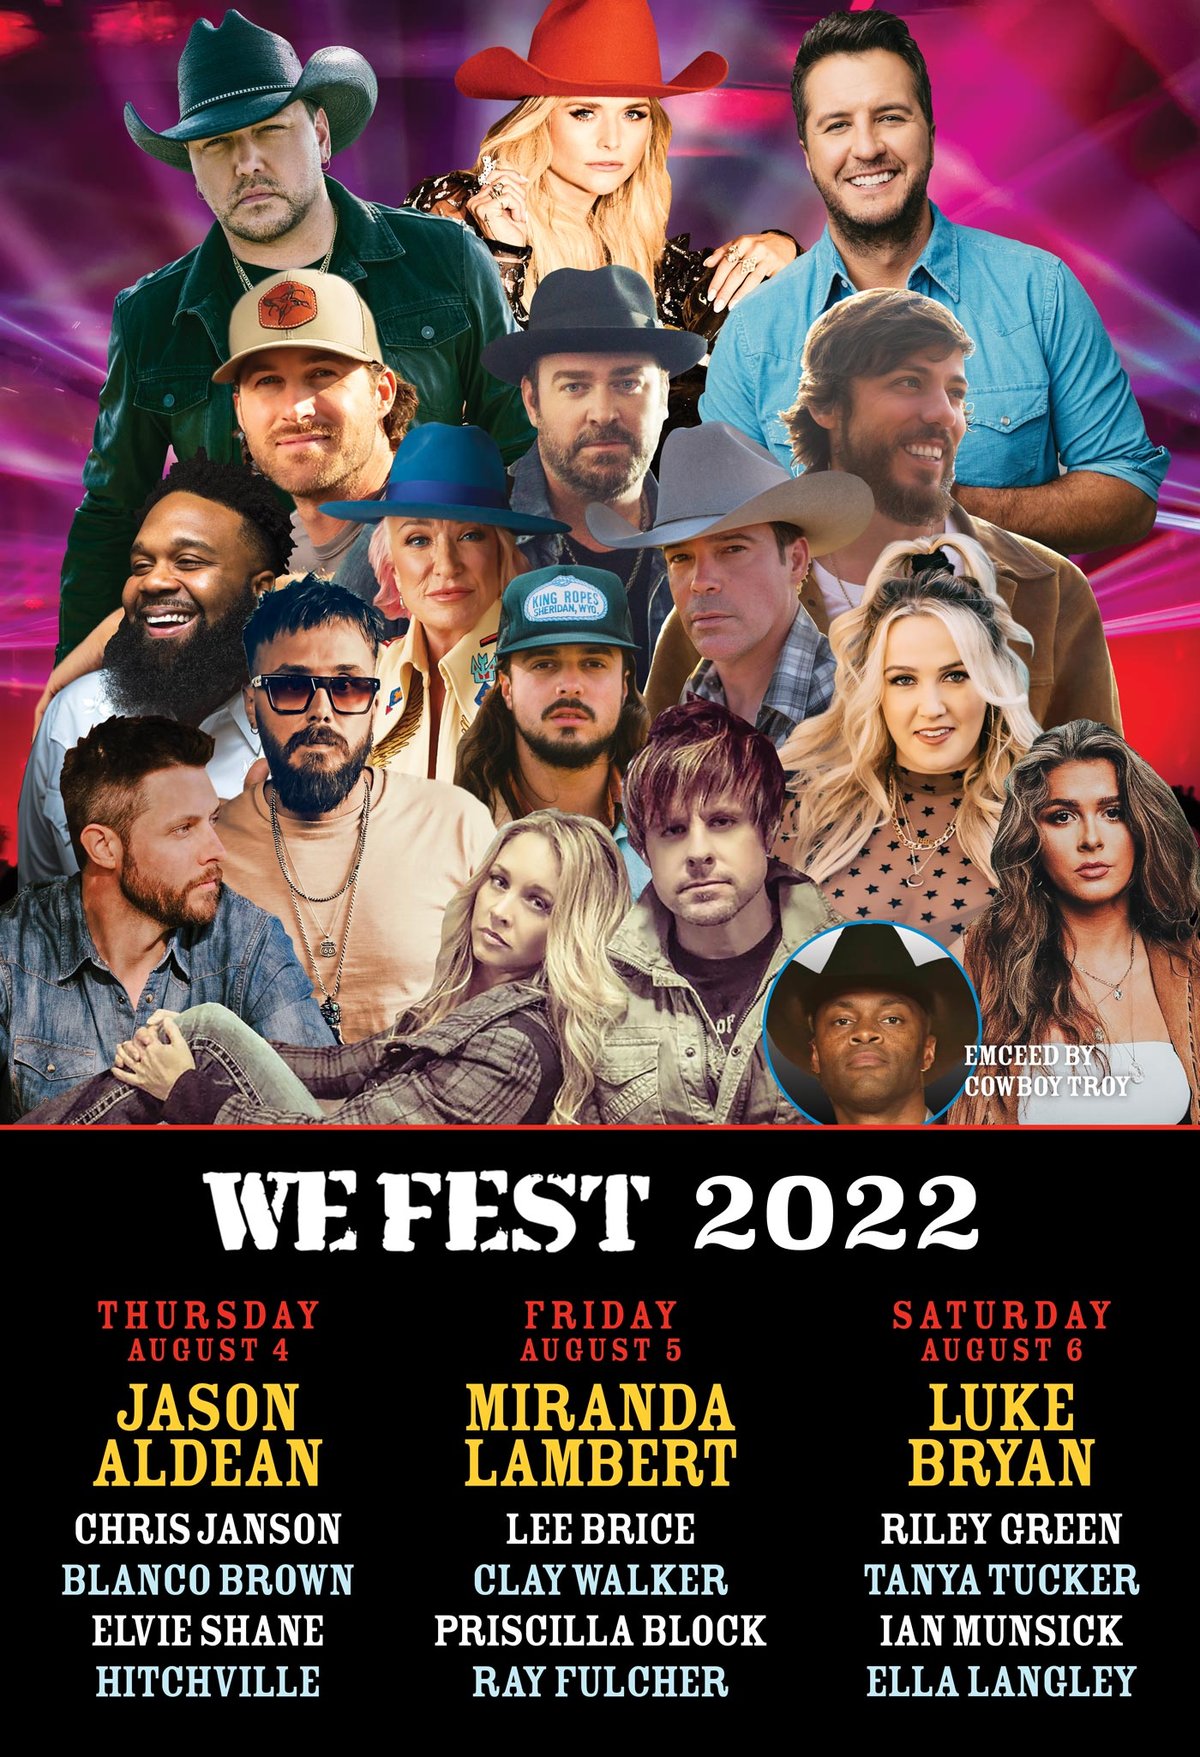 How To Find The Cheapest WE Fest Country Music Festival Tickets + 22 Lineup